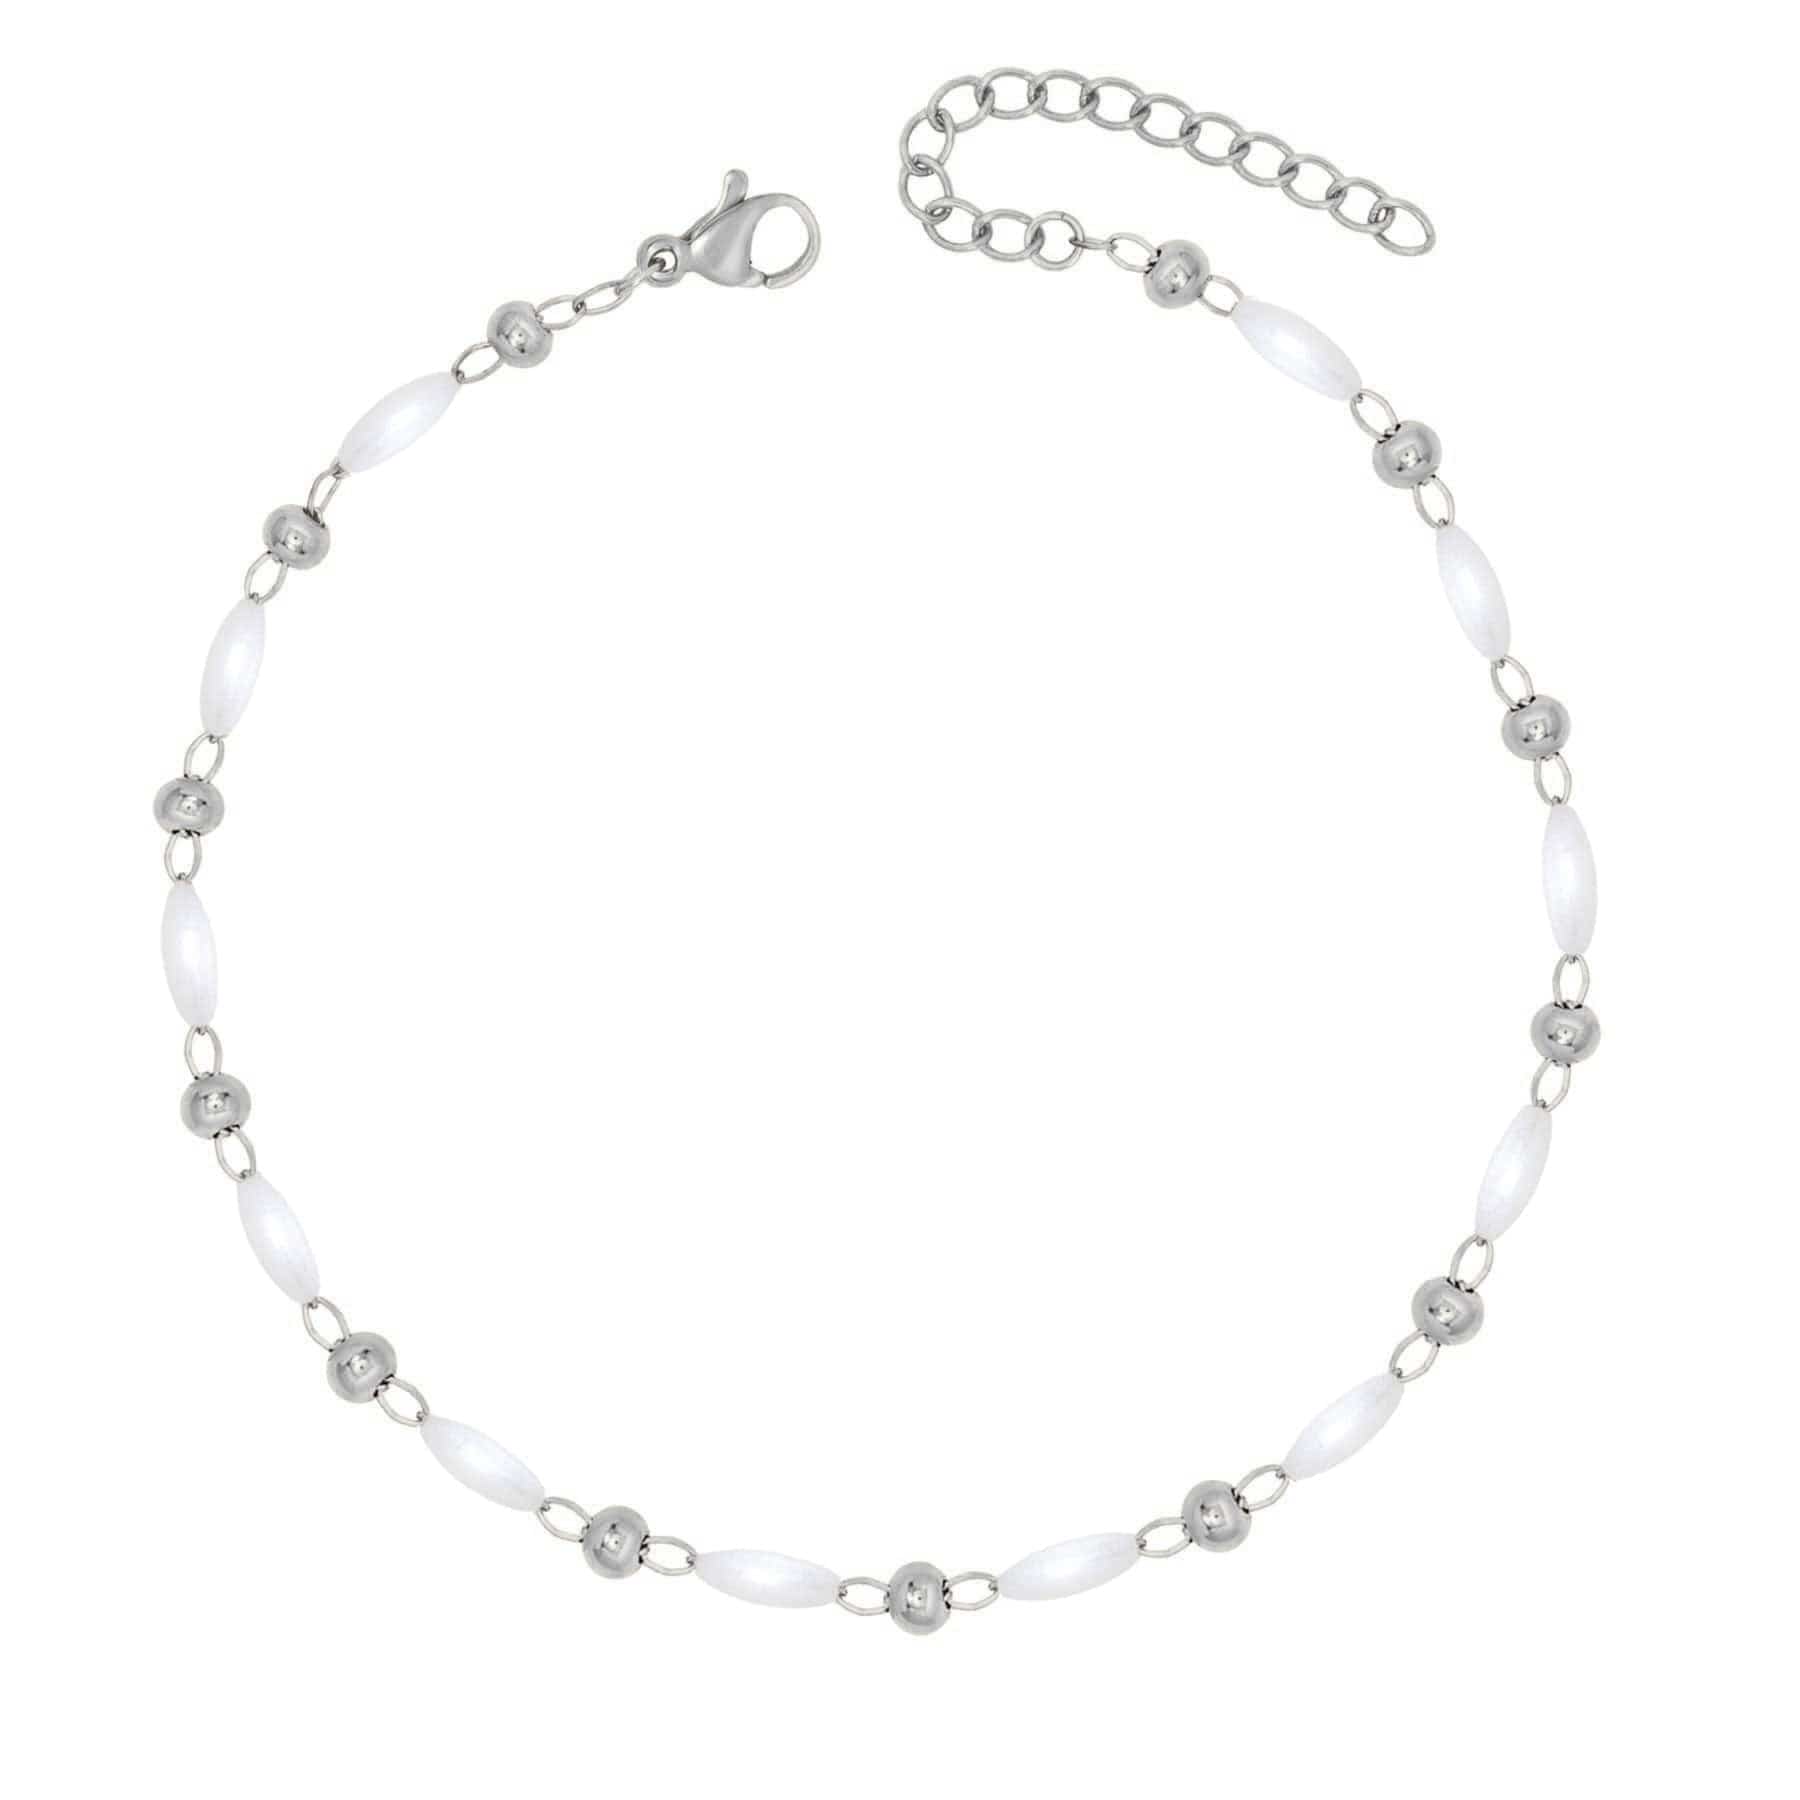 BohoMoon Stainless Steel Beatrice Pearl Anklet Silver